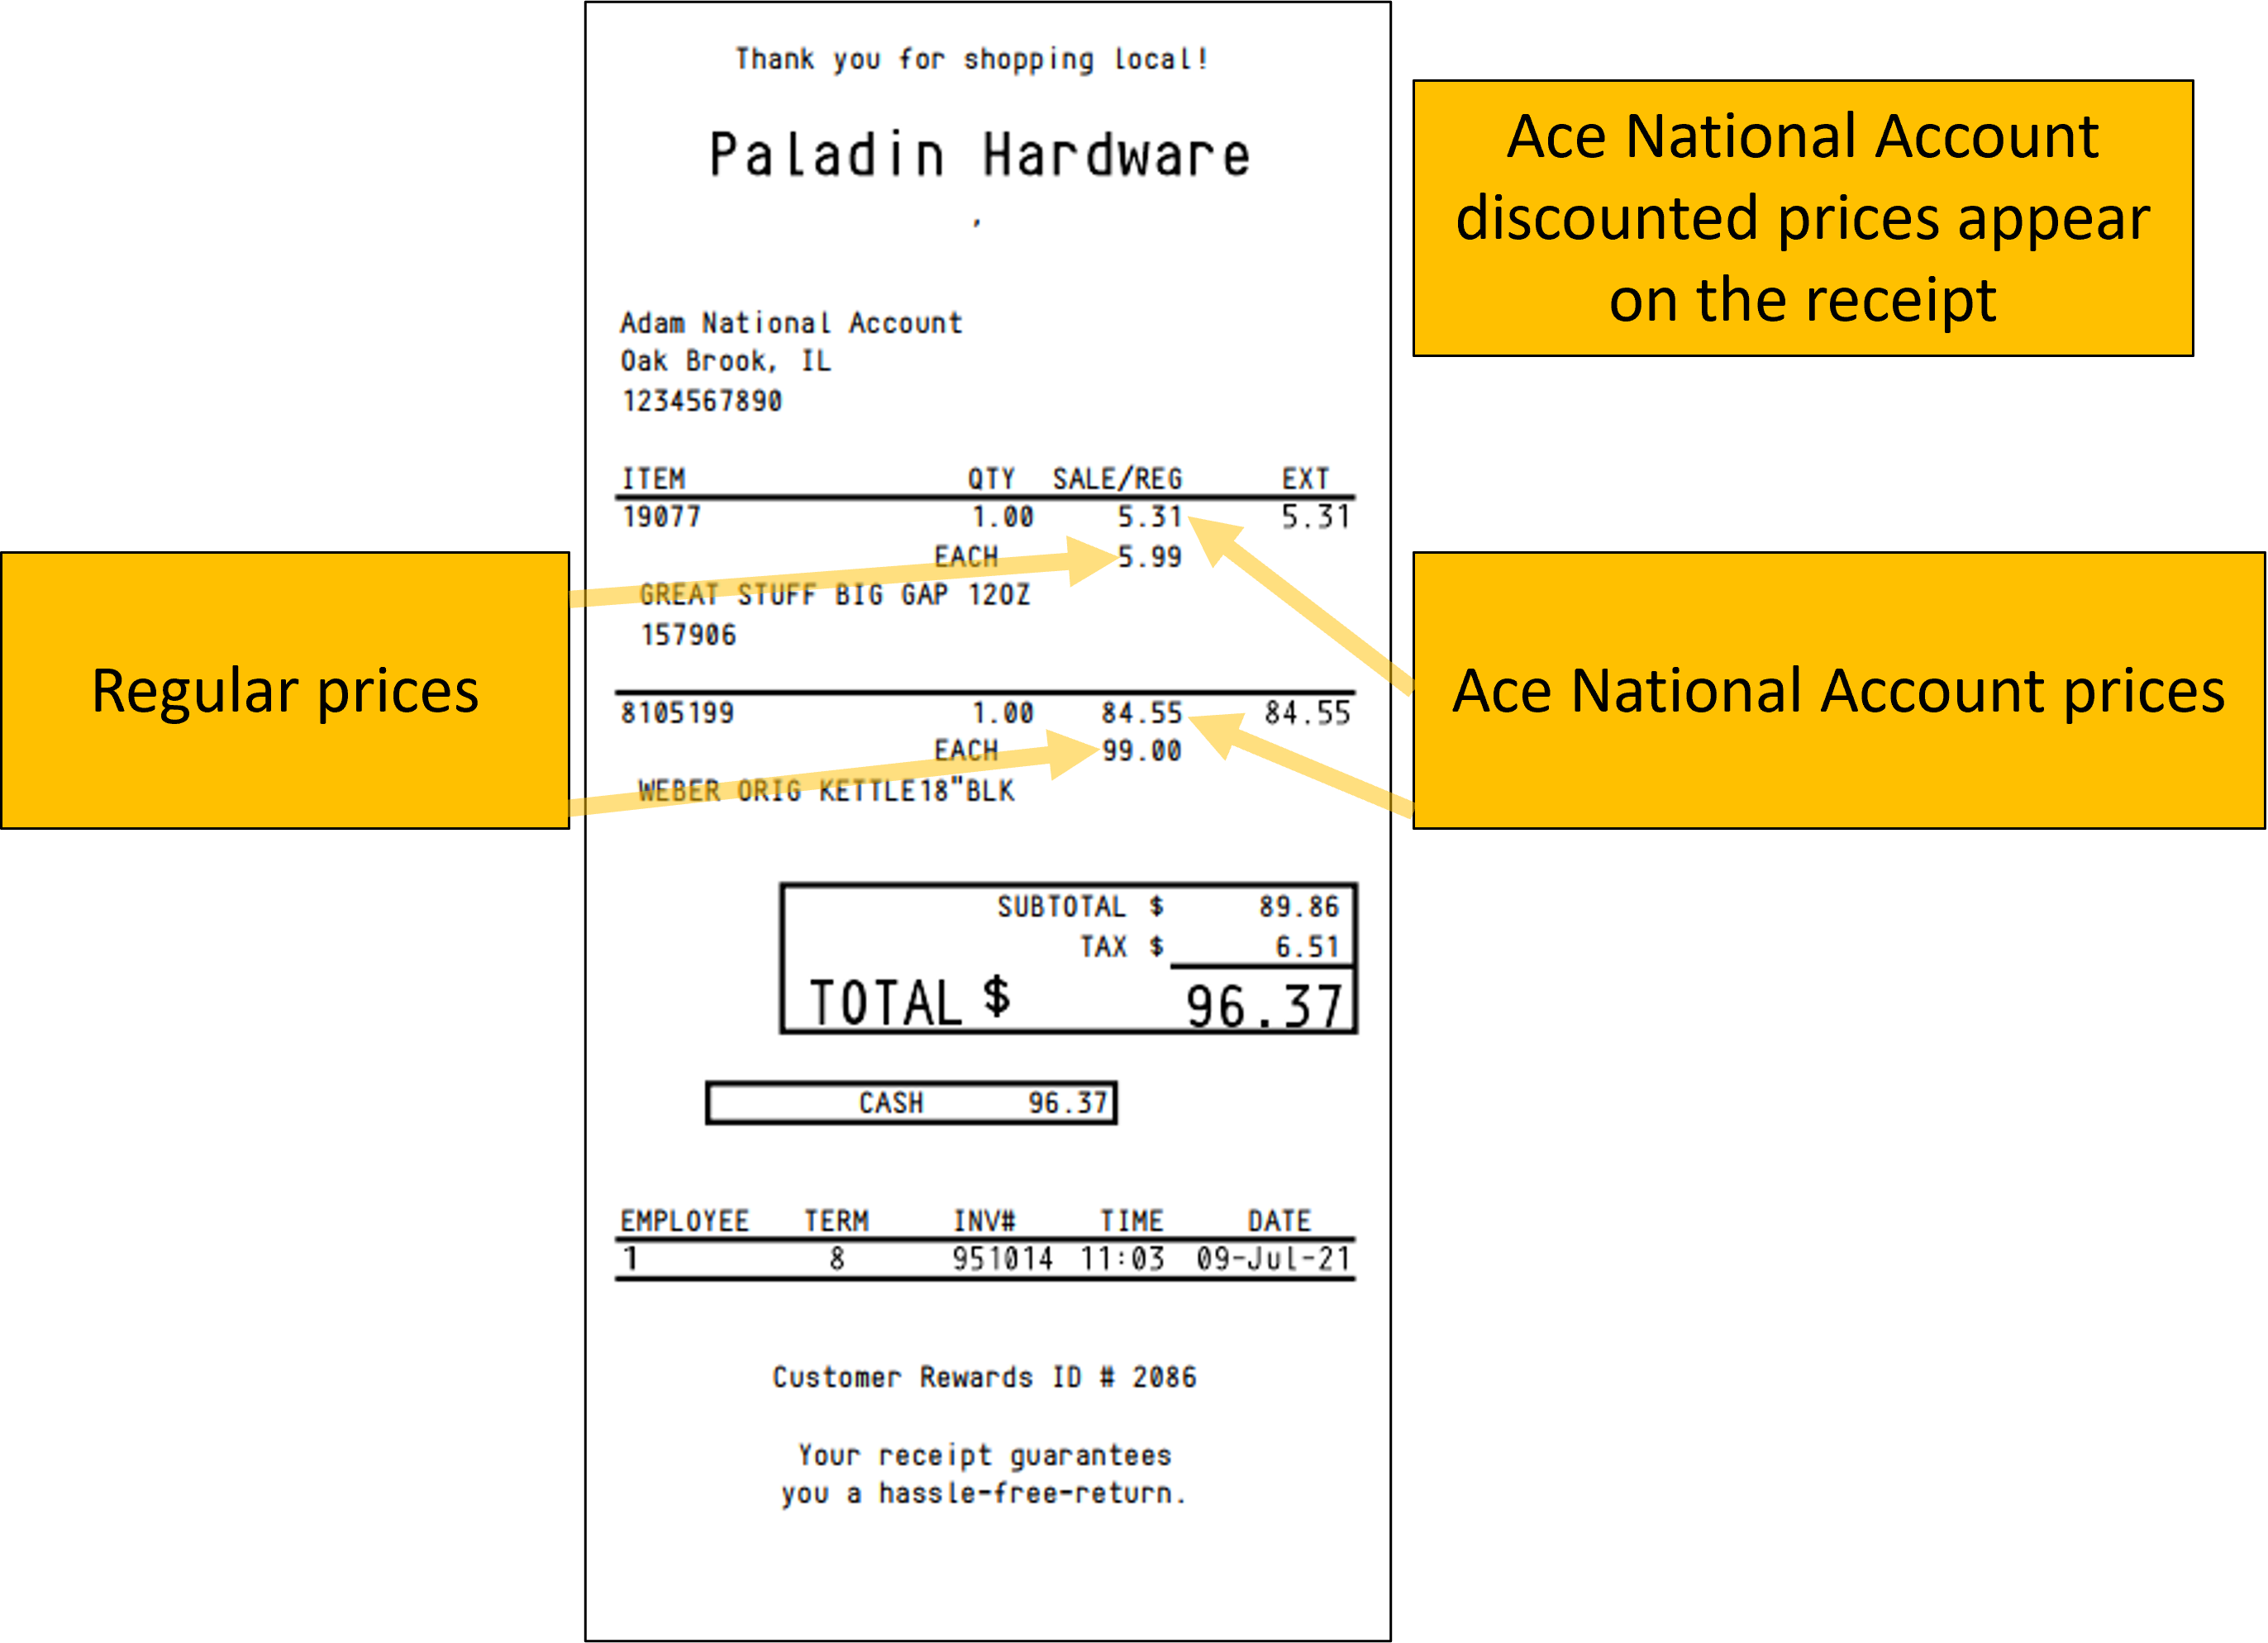 Ace National Account Discount On Receipt